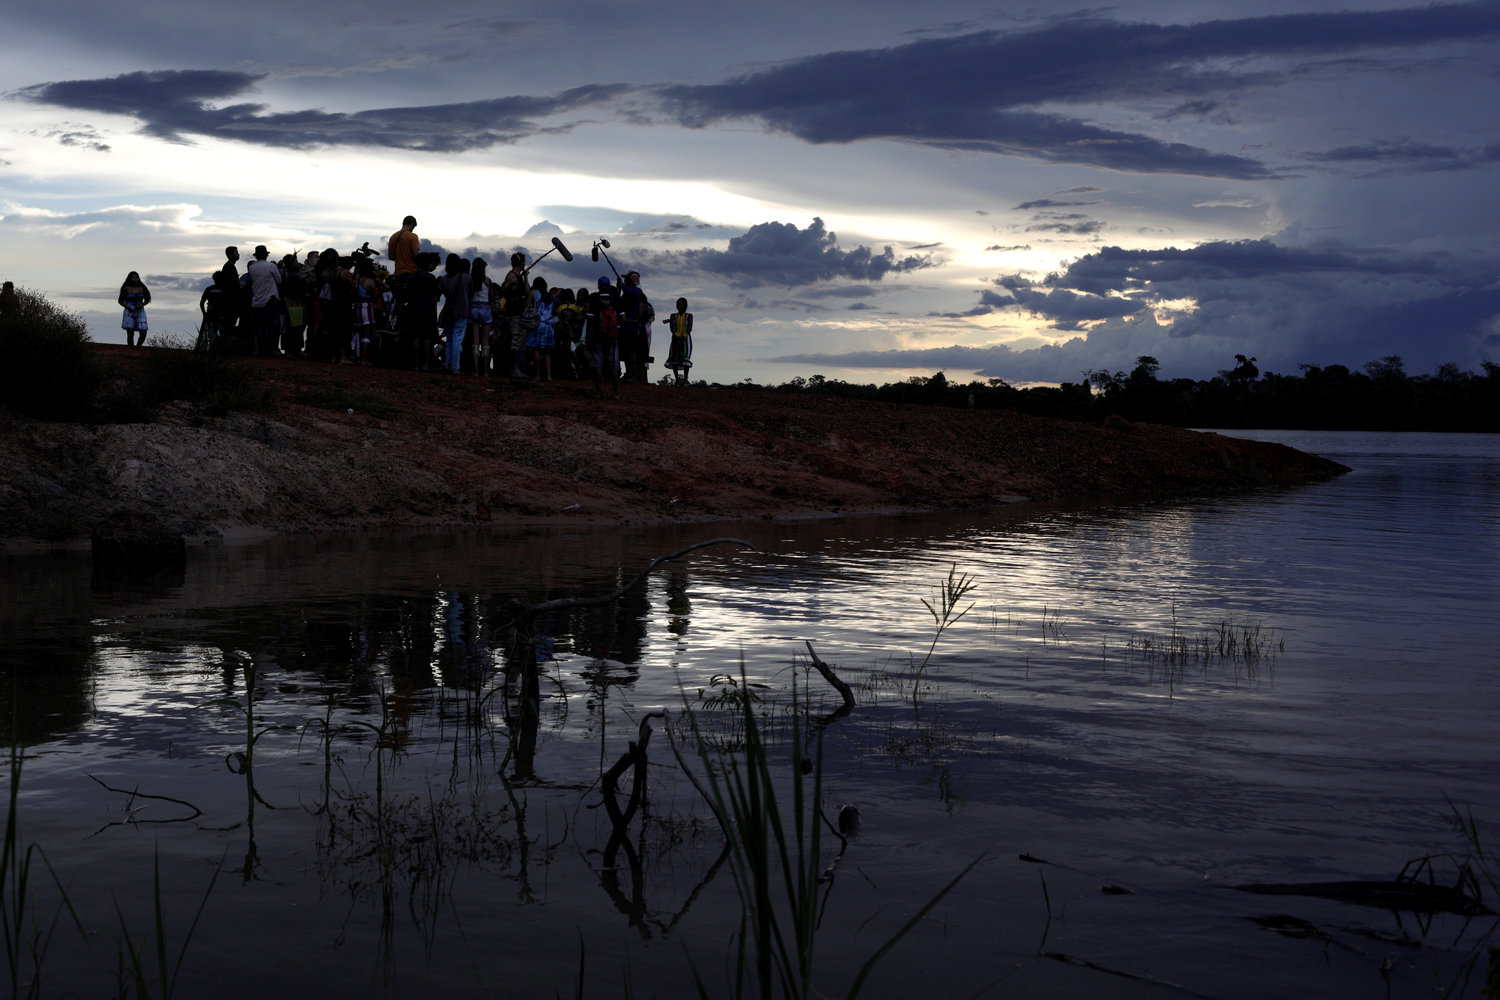 Indigenous people stand on the banks of the Xingu River during a media event in Brazil’s Xingu Indigenous Park Jan. 15, 2020.